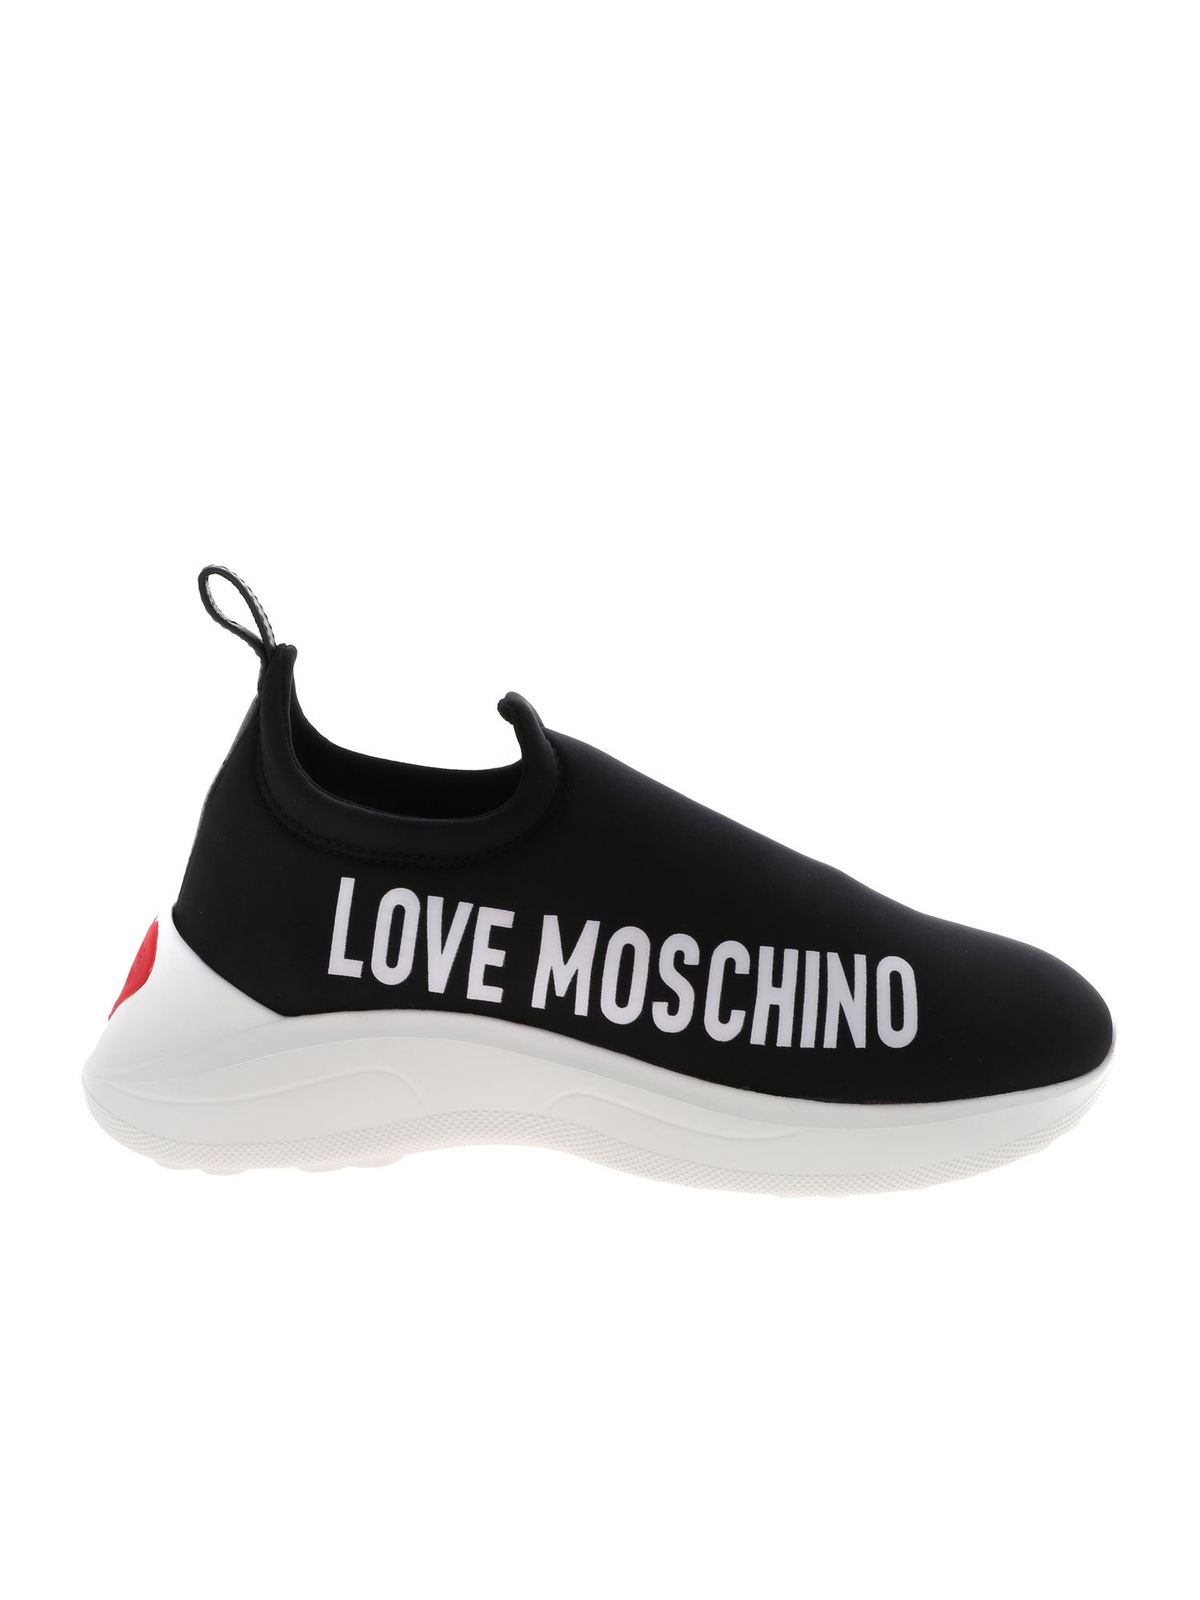 Love Moschino - Black sneakers with 